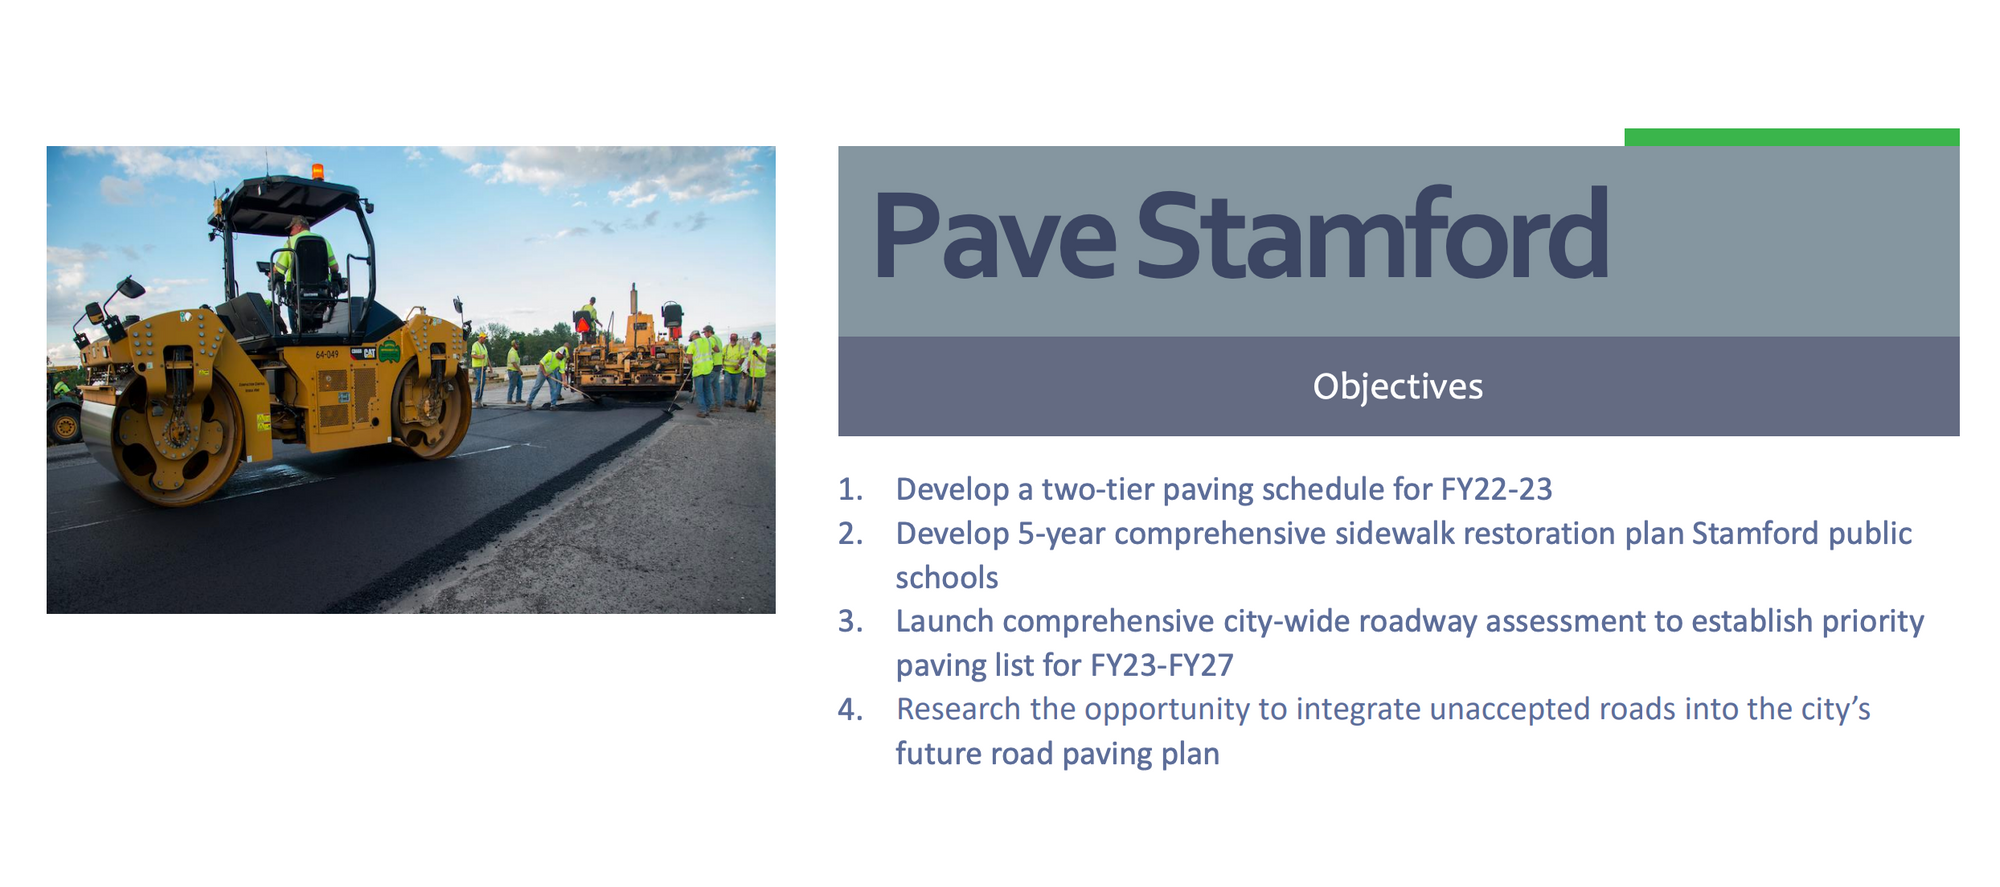 A look at the objectives for the Pave Stamford program.